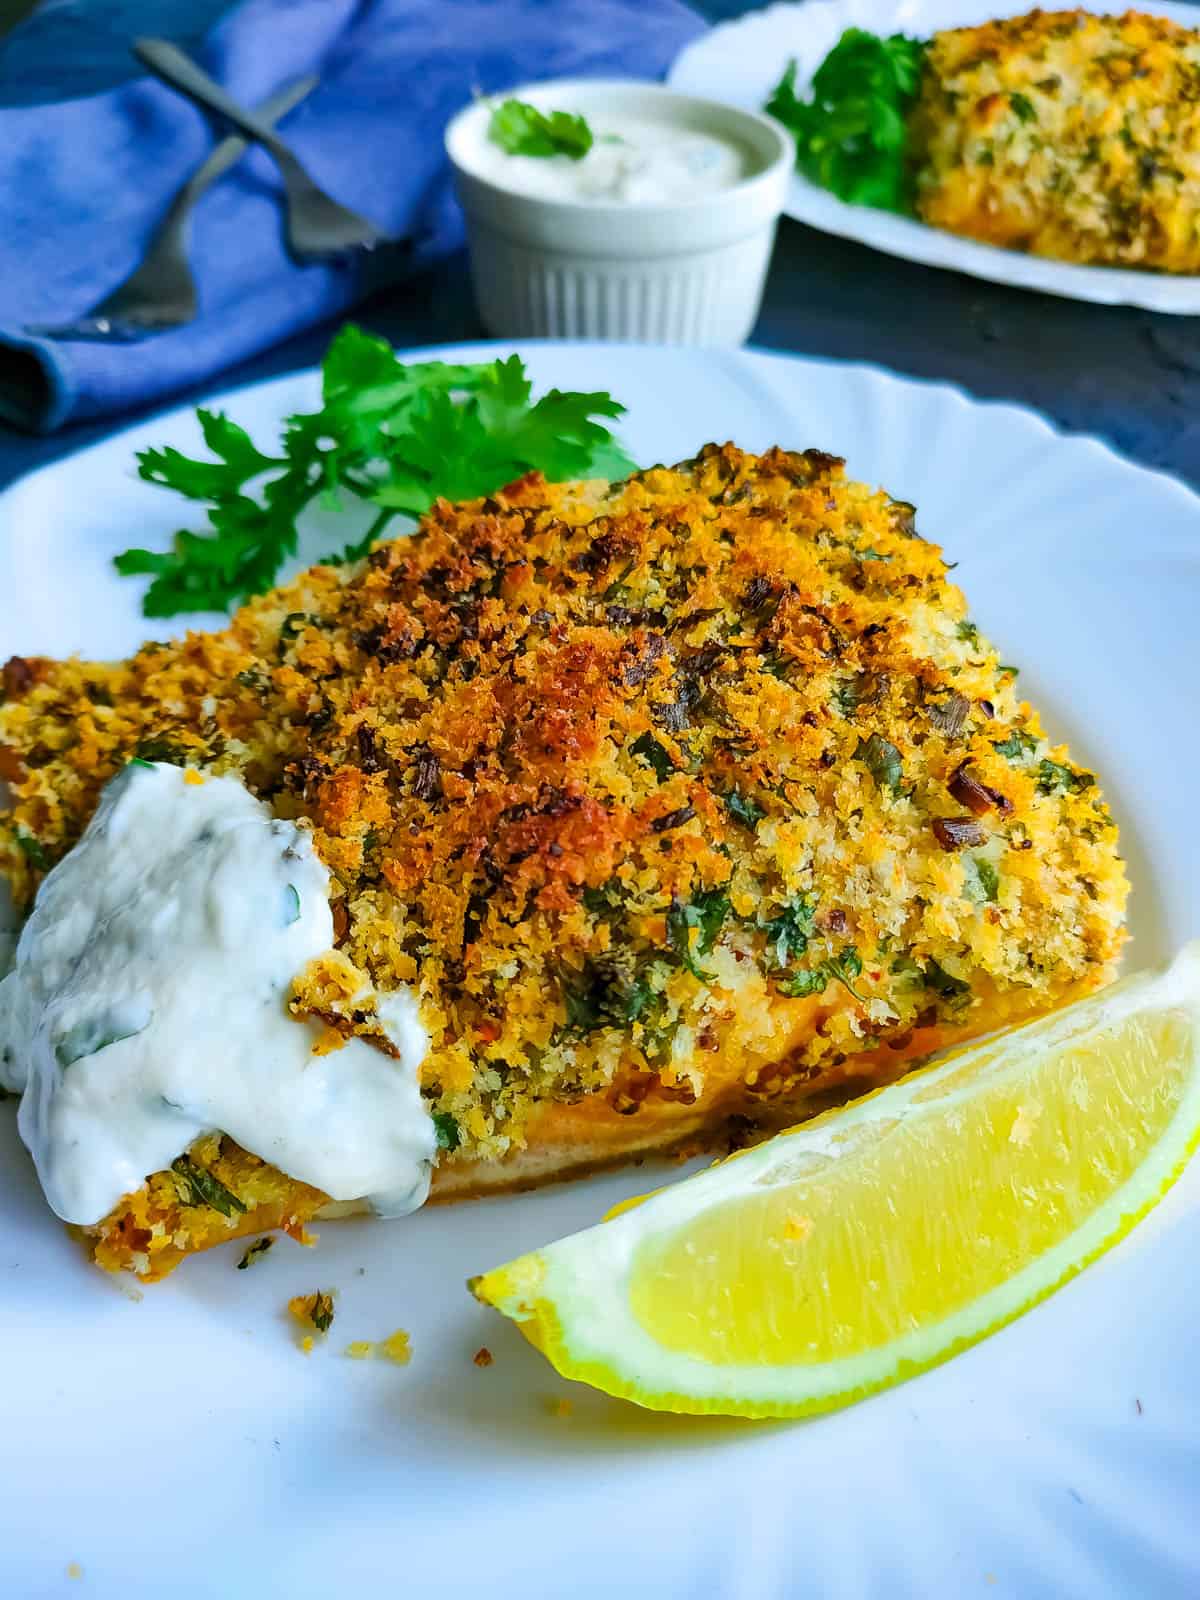 Panko crusted cod with yogurt sauce and garnished with parsley and lemon slices on a white plate.